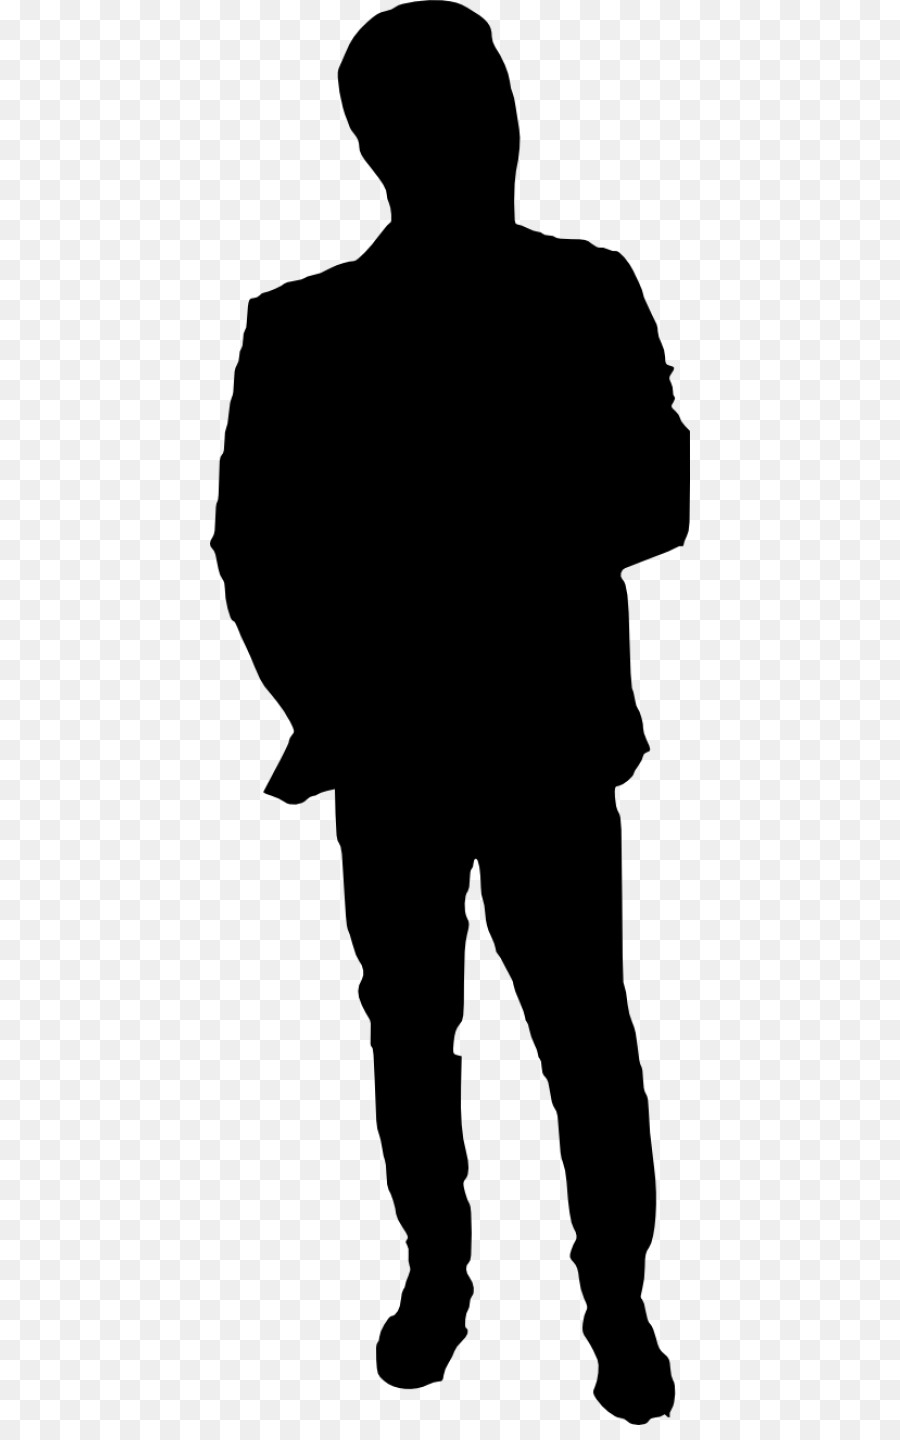 Silhouette Clip art - png man silhouette png download - 480*1425 - Free Transparent Silhouette png Download.